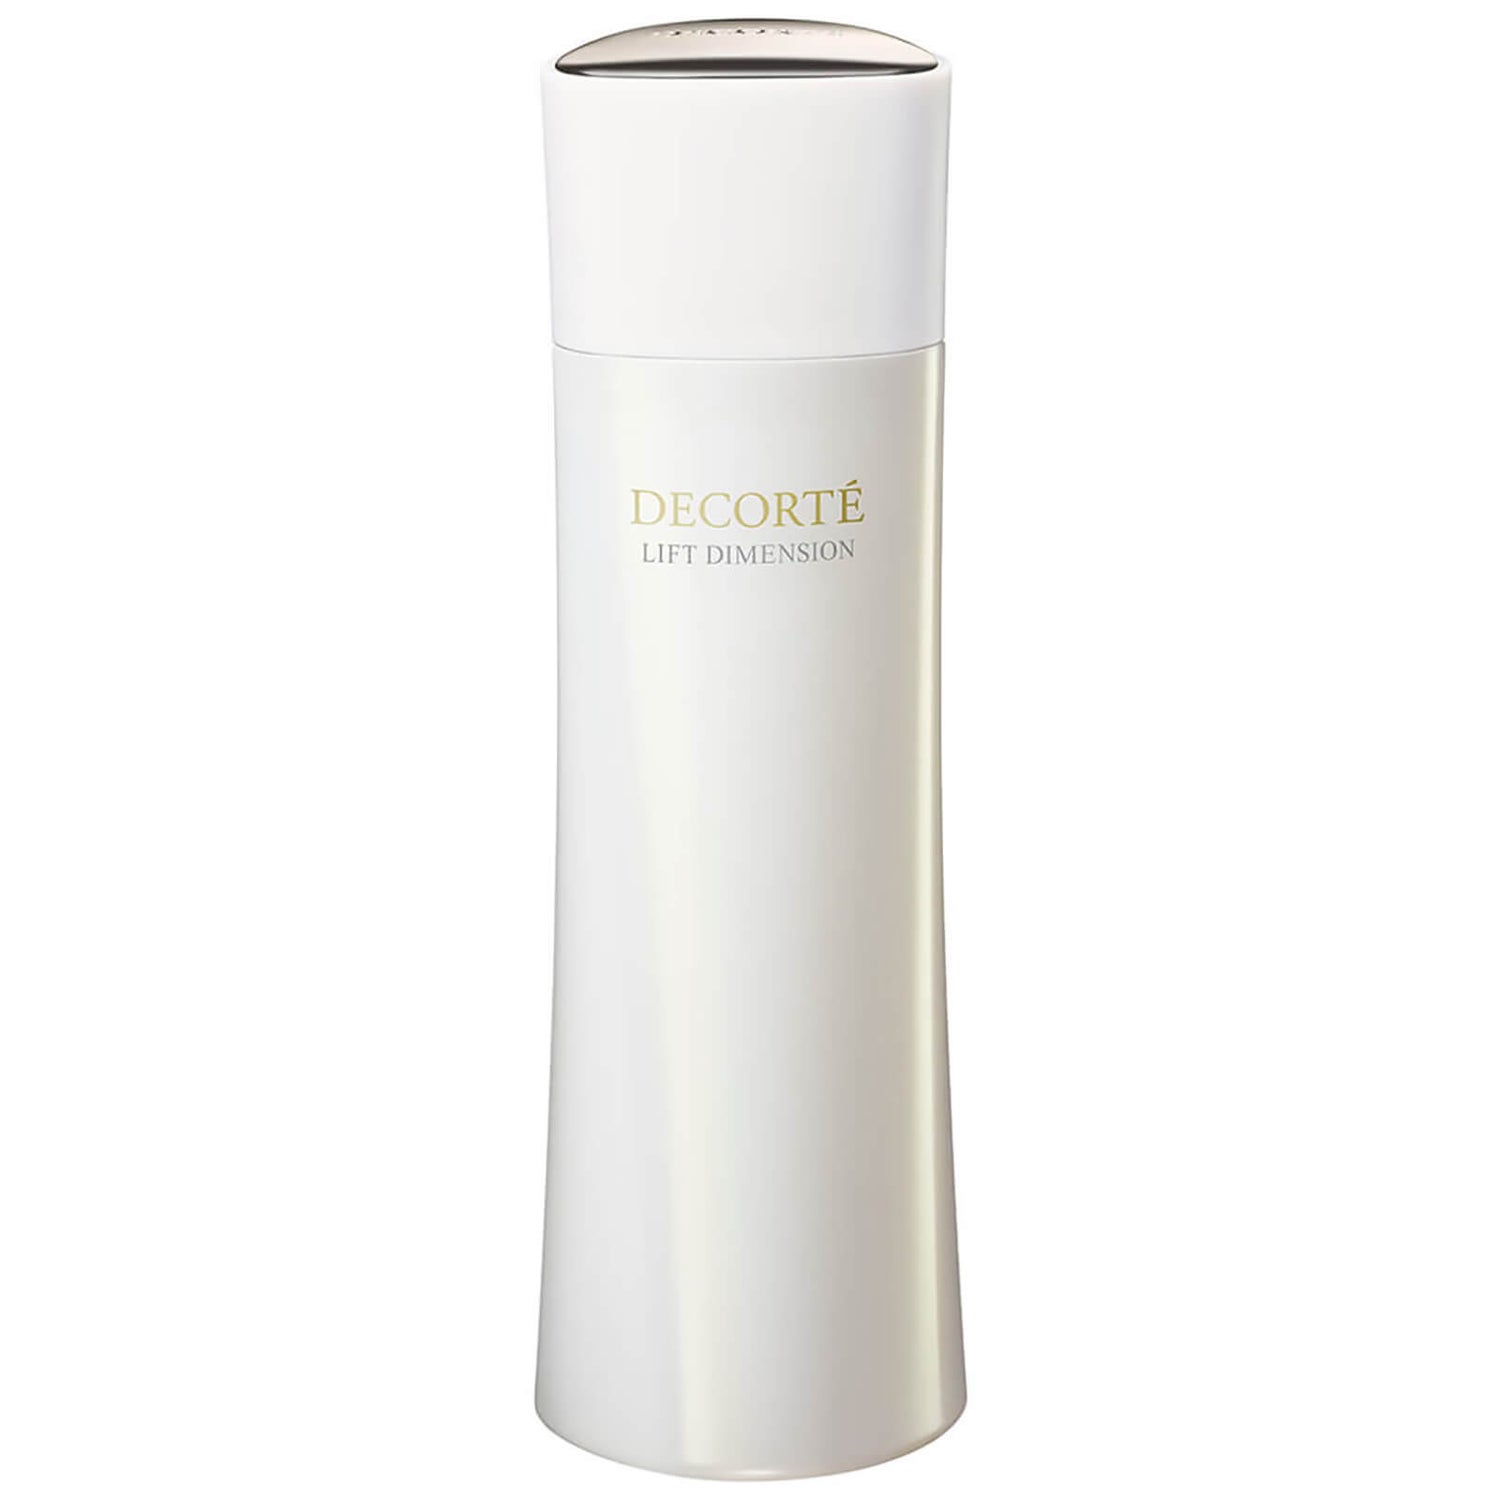 Decorté Replenish and Firm Extra Rich Lotion 200ml